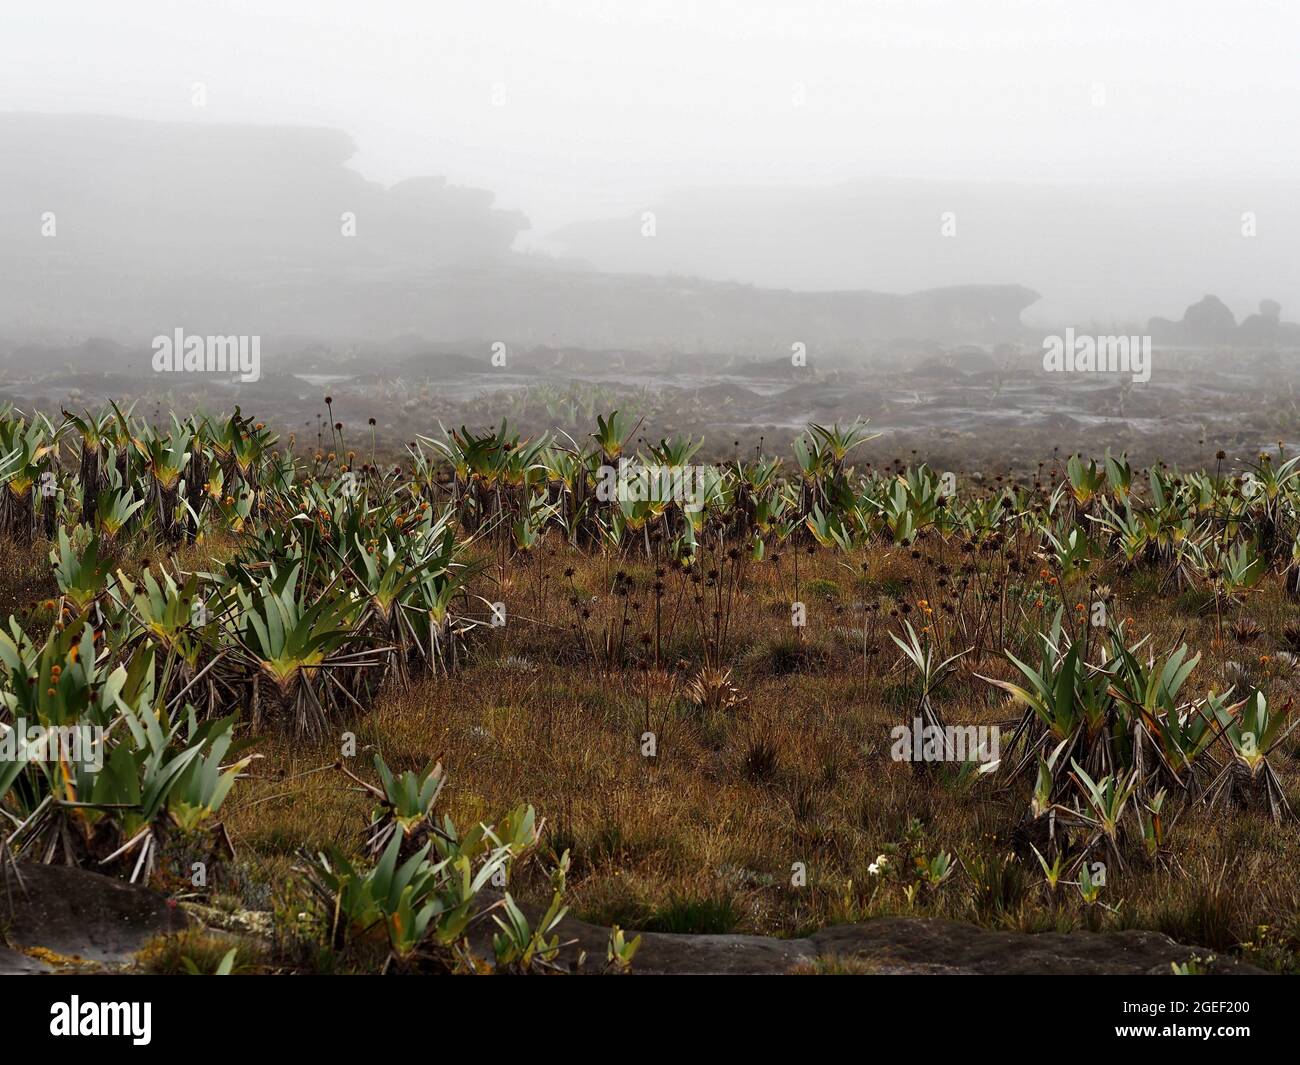 Landscape of a field covered in brocchinia hechtioides and dried grass on a foggy day Stock Photo